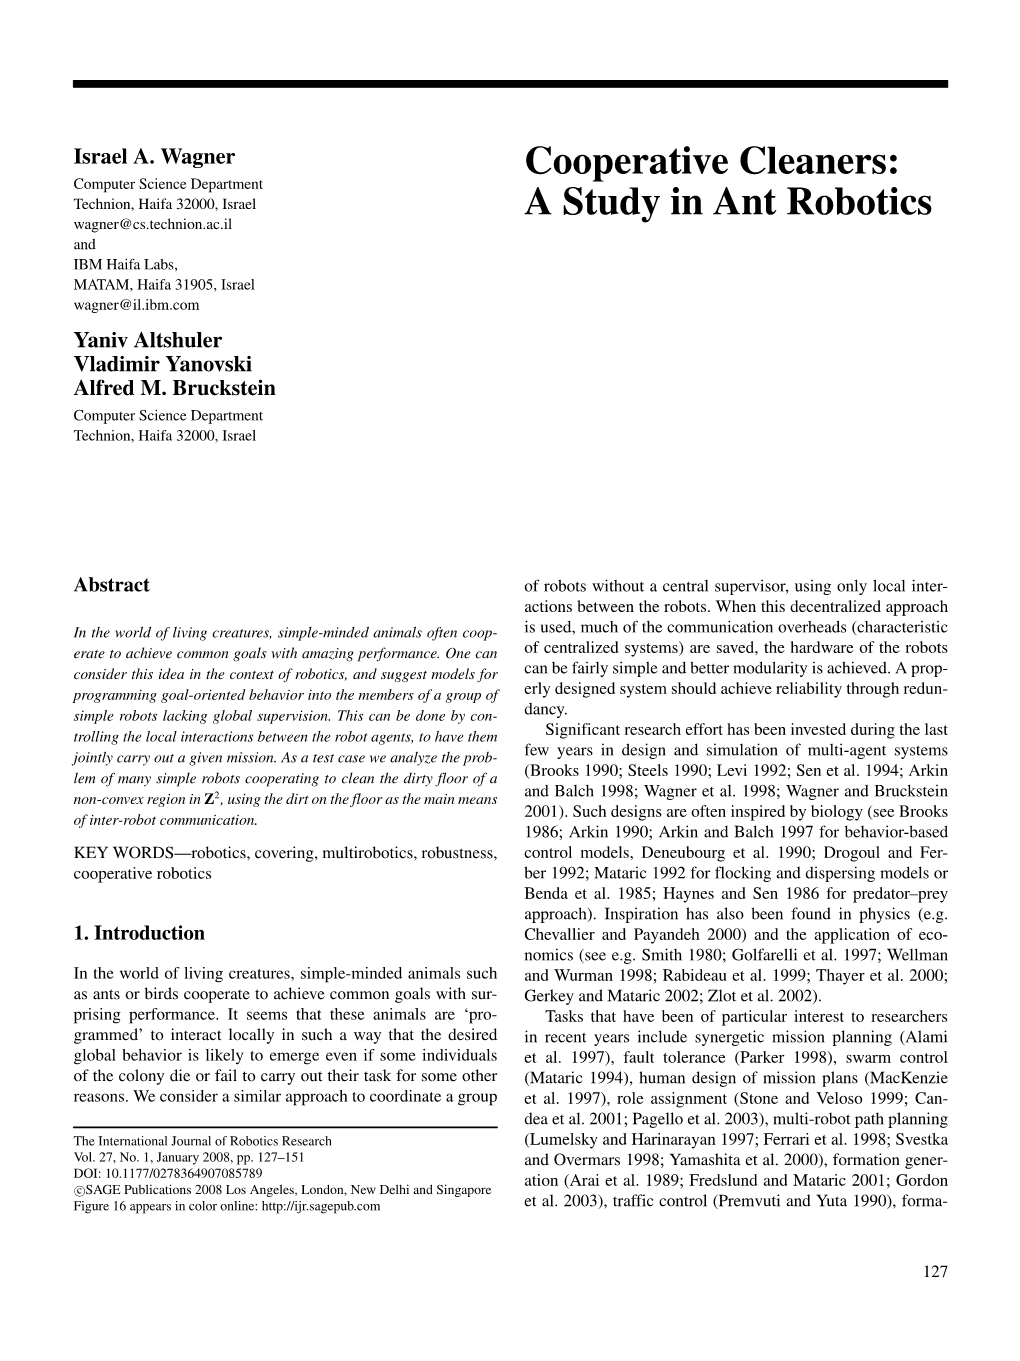 Cooperative Cleaners: a Study in Ant Robotics